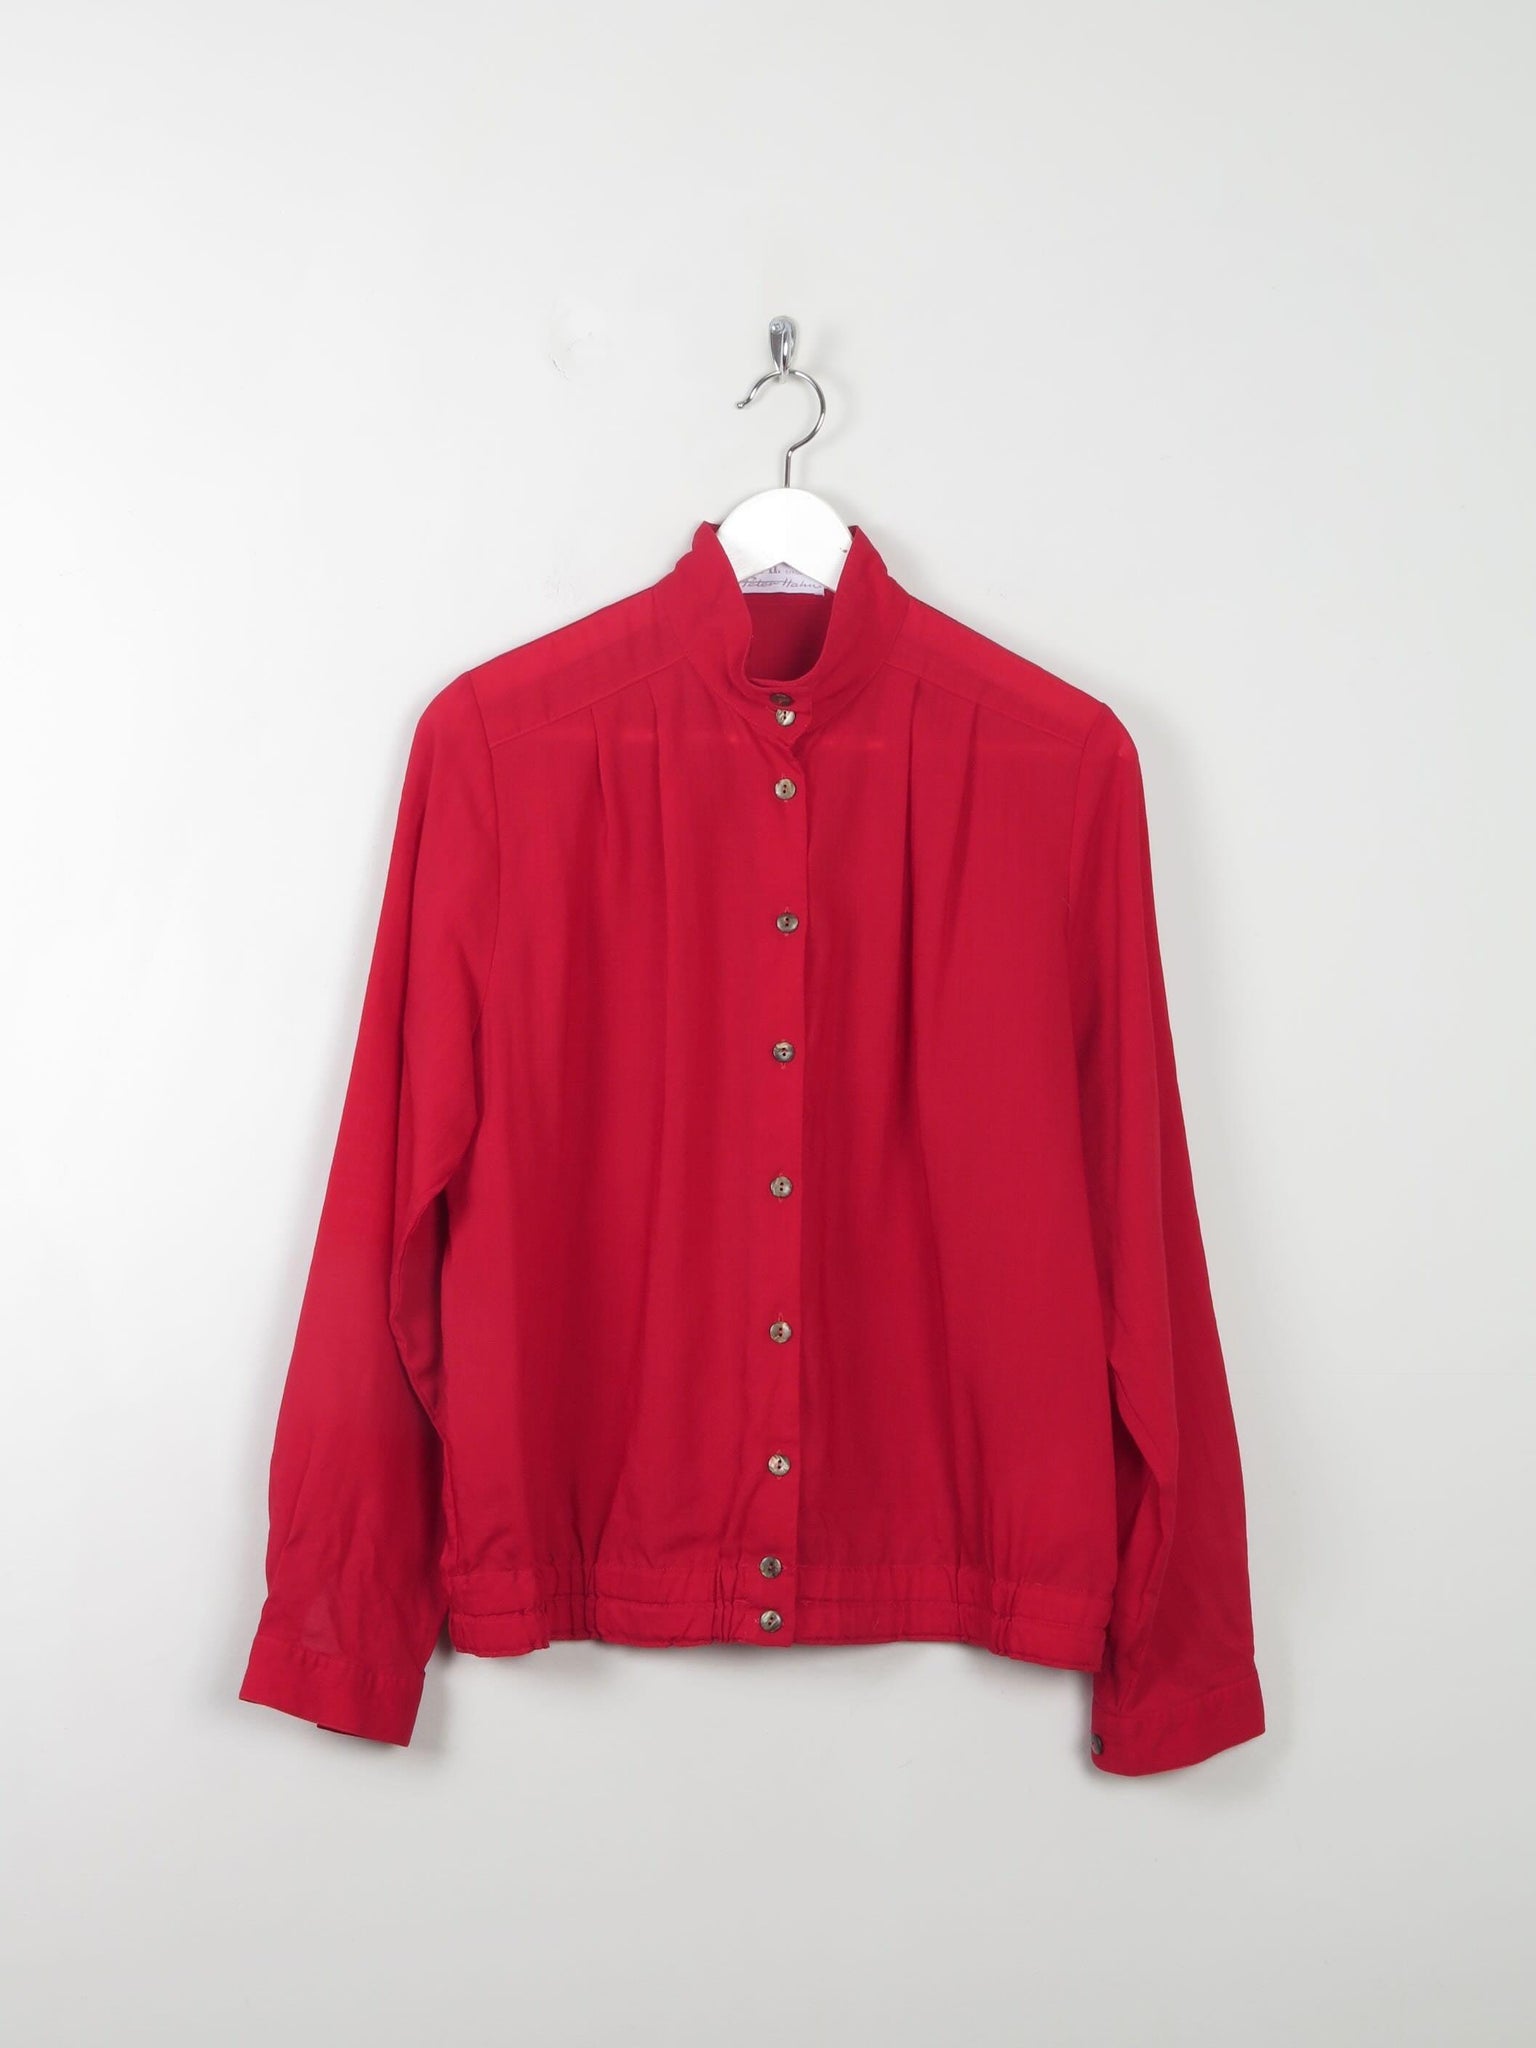 Women's Red Vintage Wool Blouse S/M - The Harlequin